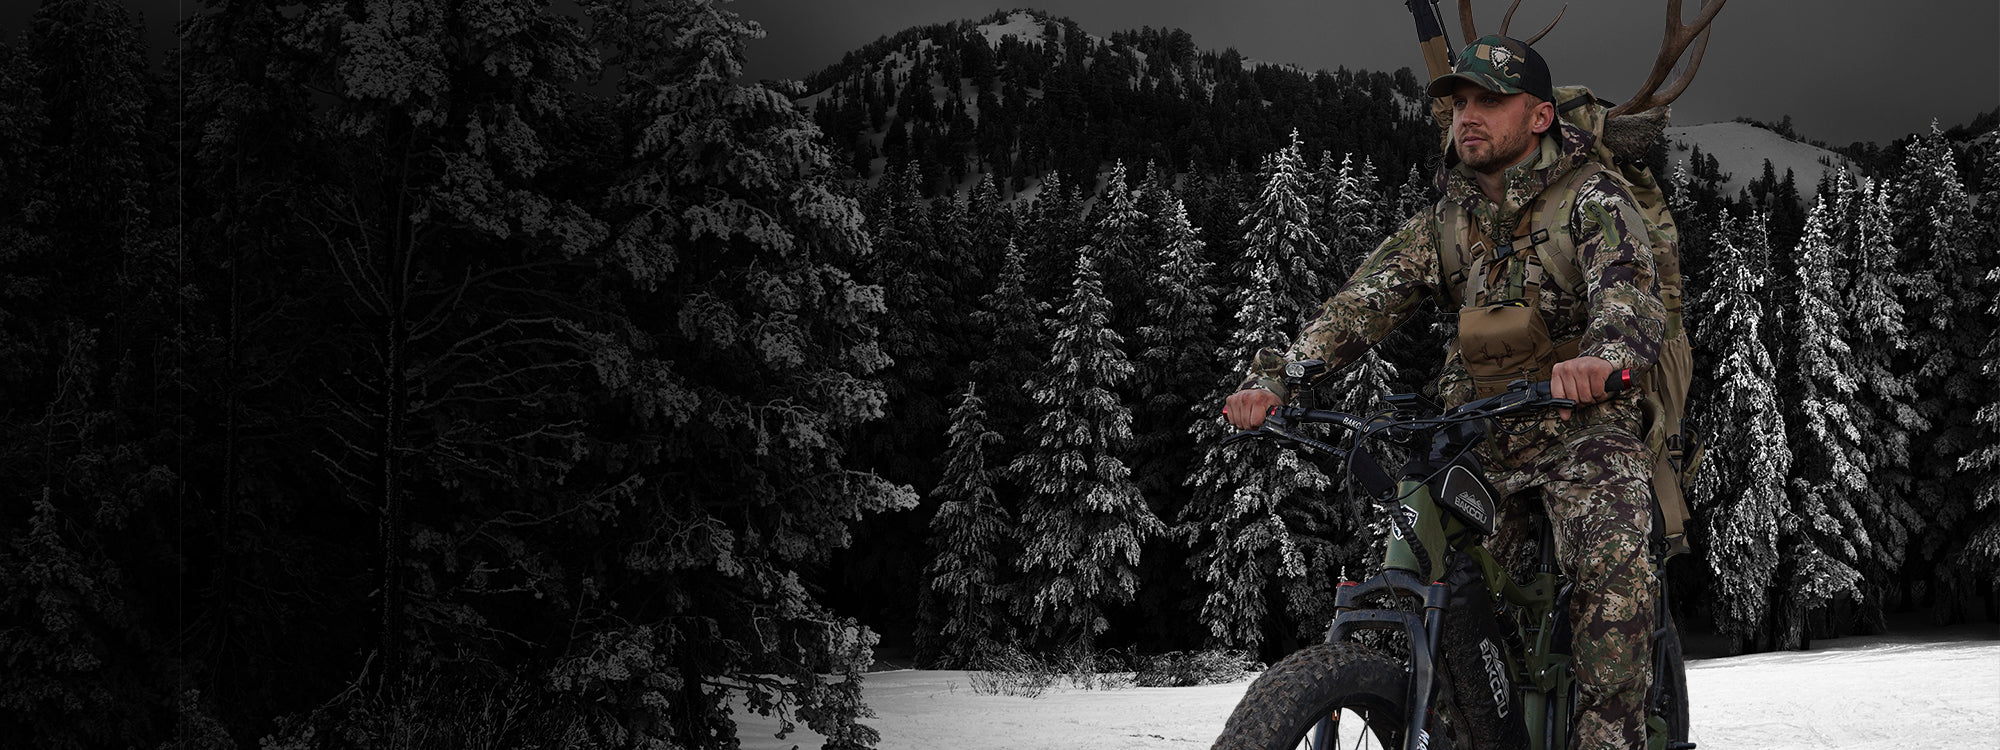 Hunter on an eBike with antlers in his pack on a snowy day surrounded by pine trees